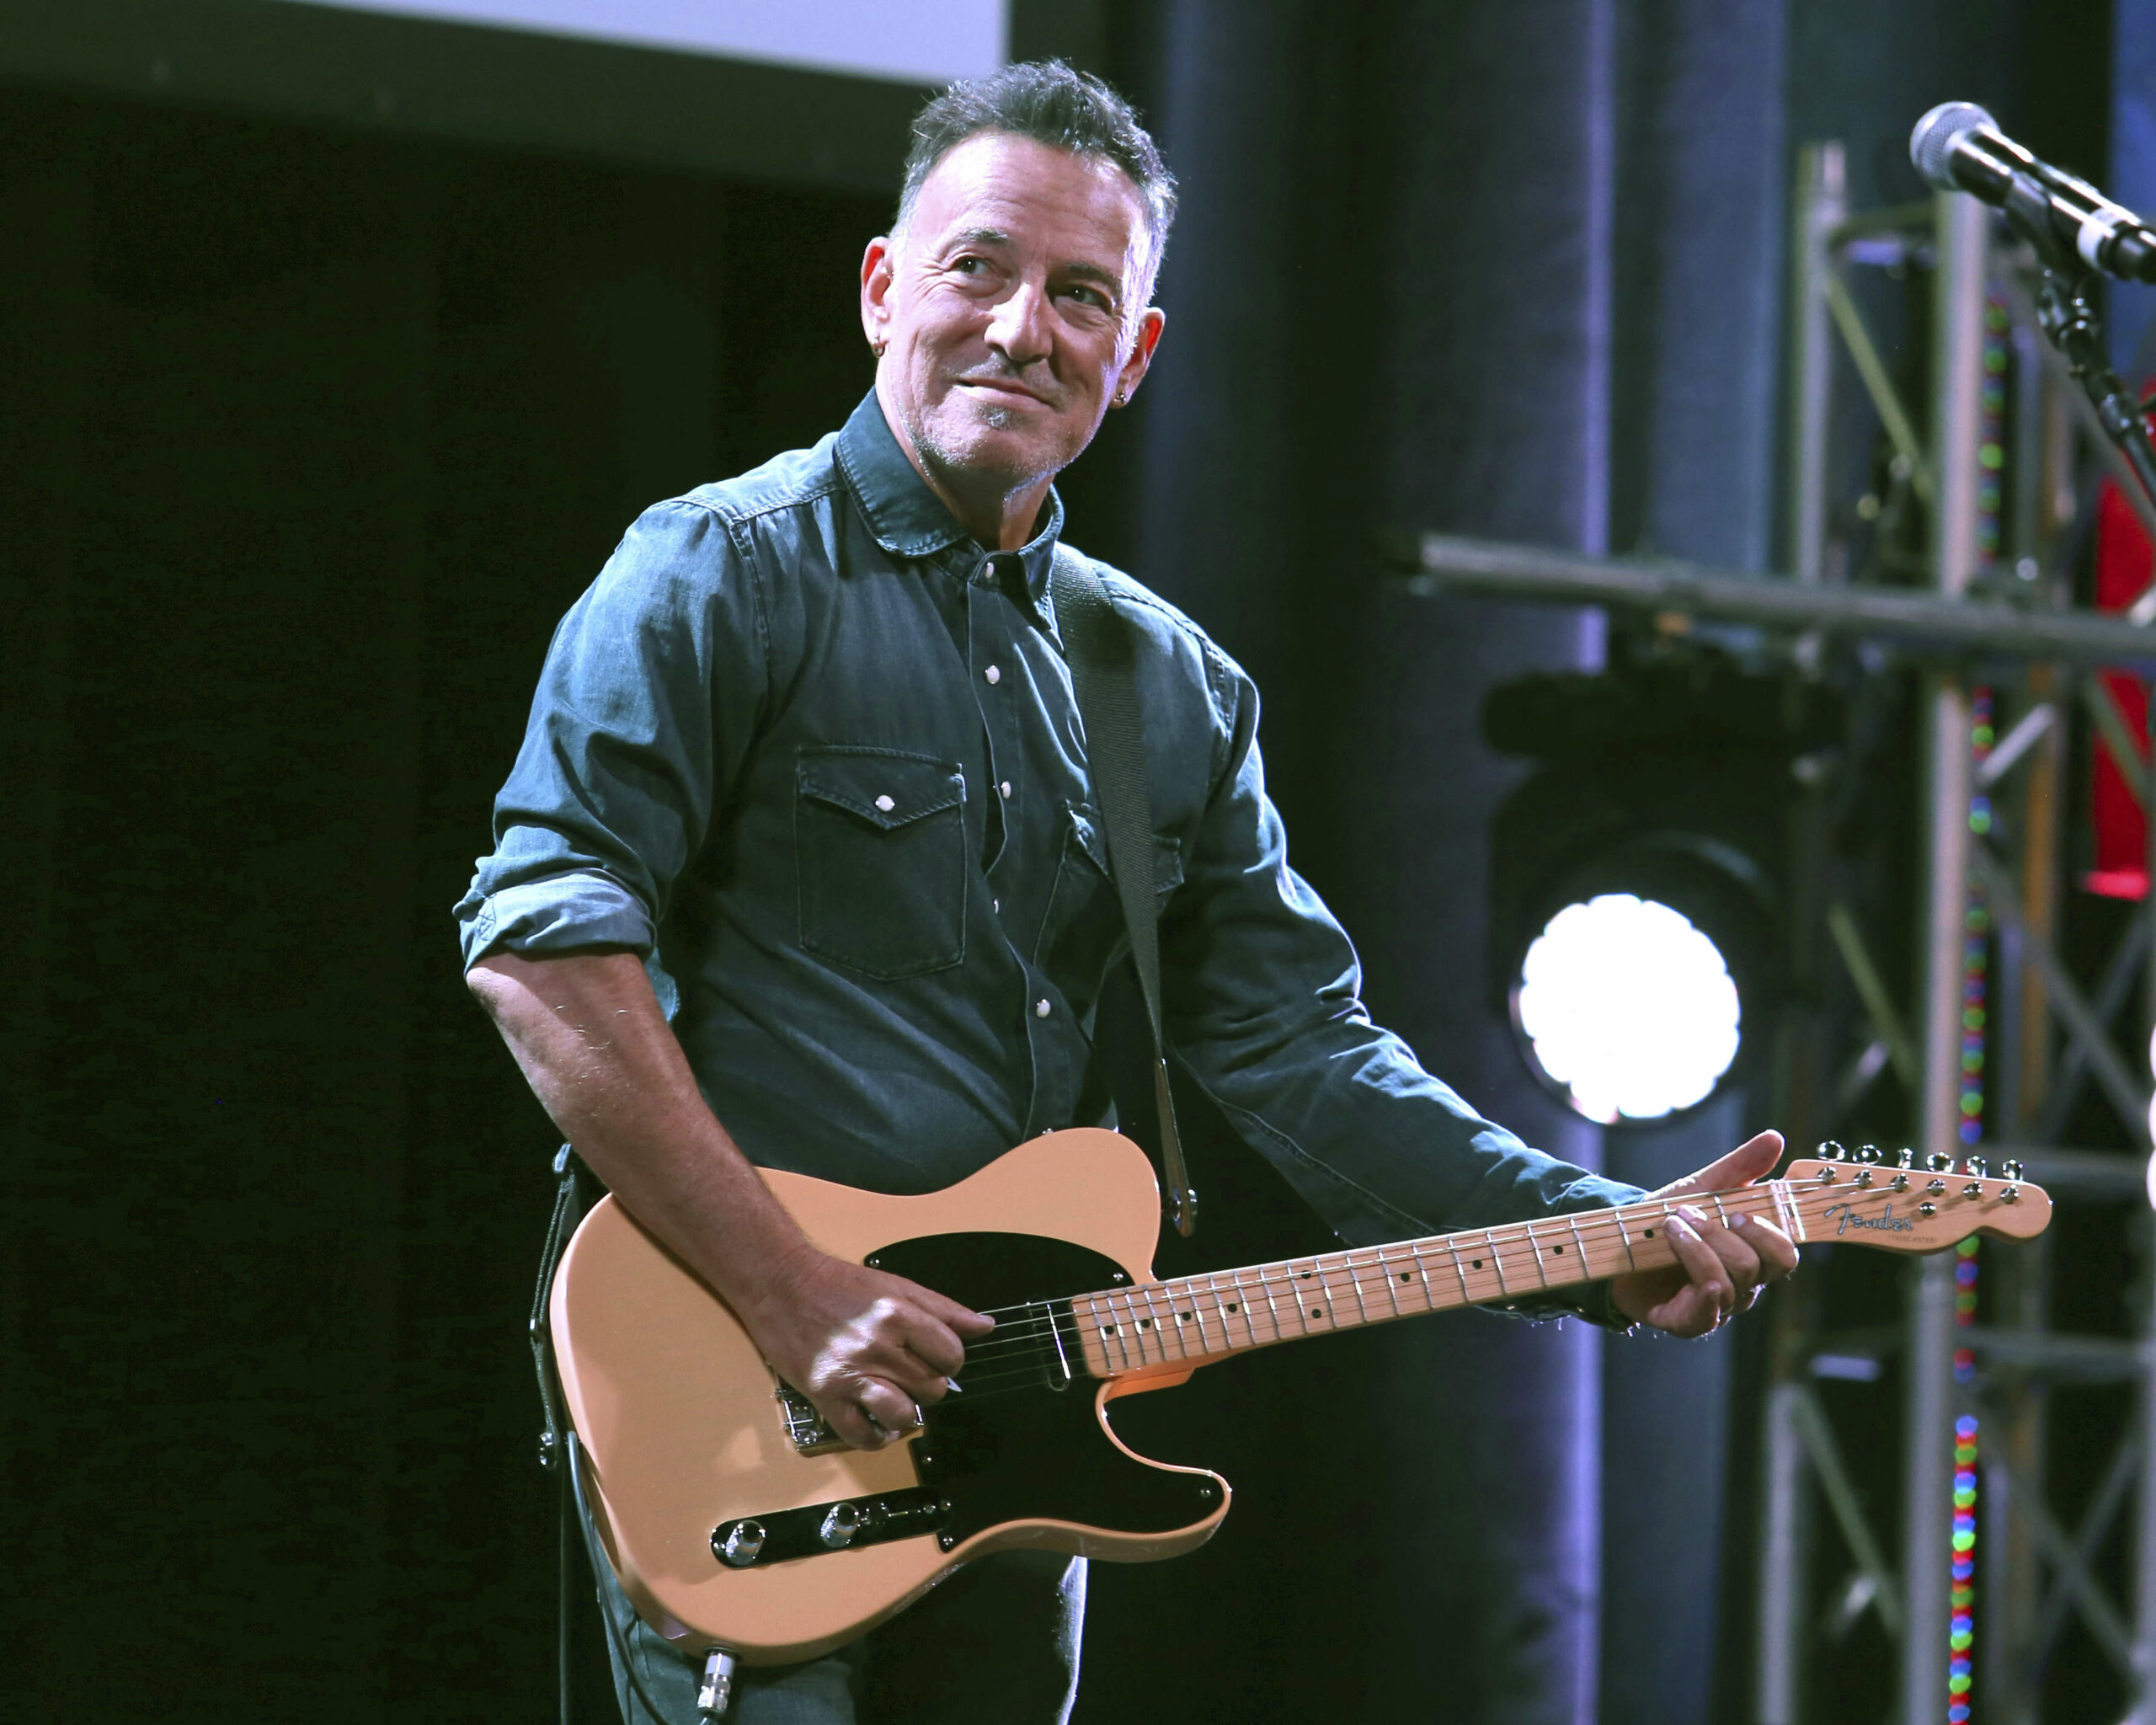 FILE - Bruce Springsteen performs at Stand Up For Heroes in New York on Nov. 1, 2016. Springsteen’s most memorable artifacts will travel across the country with a new landing spot in Los Angeles. The Grammy Museum announced Wednesday that Bruce Springsteen Live! will open at the Grammy Museum L.A. Live in downtown Los Angeles on Oct. 15. (Photo by Greg Allen/Invision/AP, File)